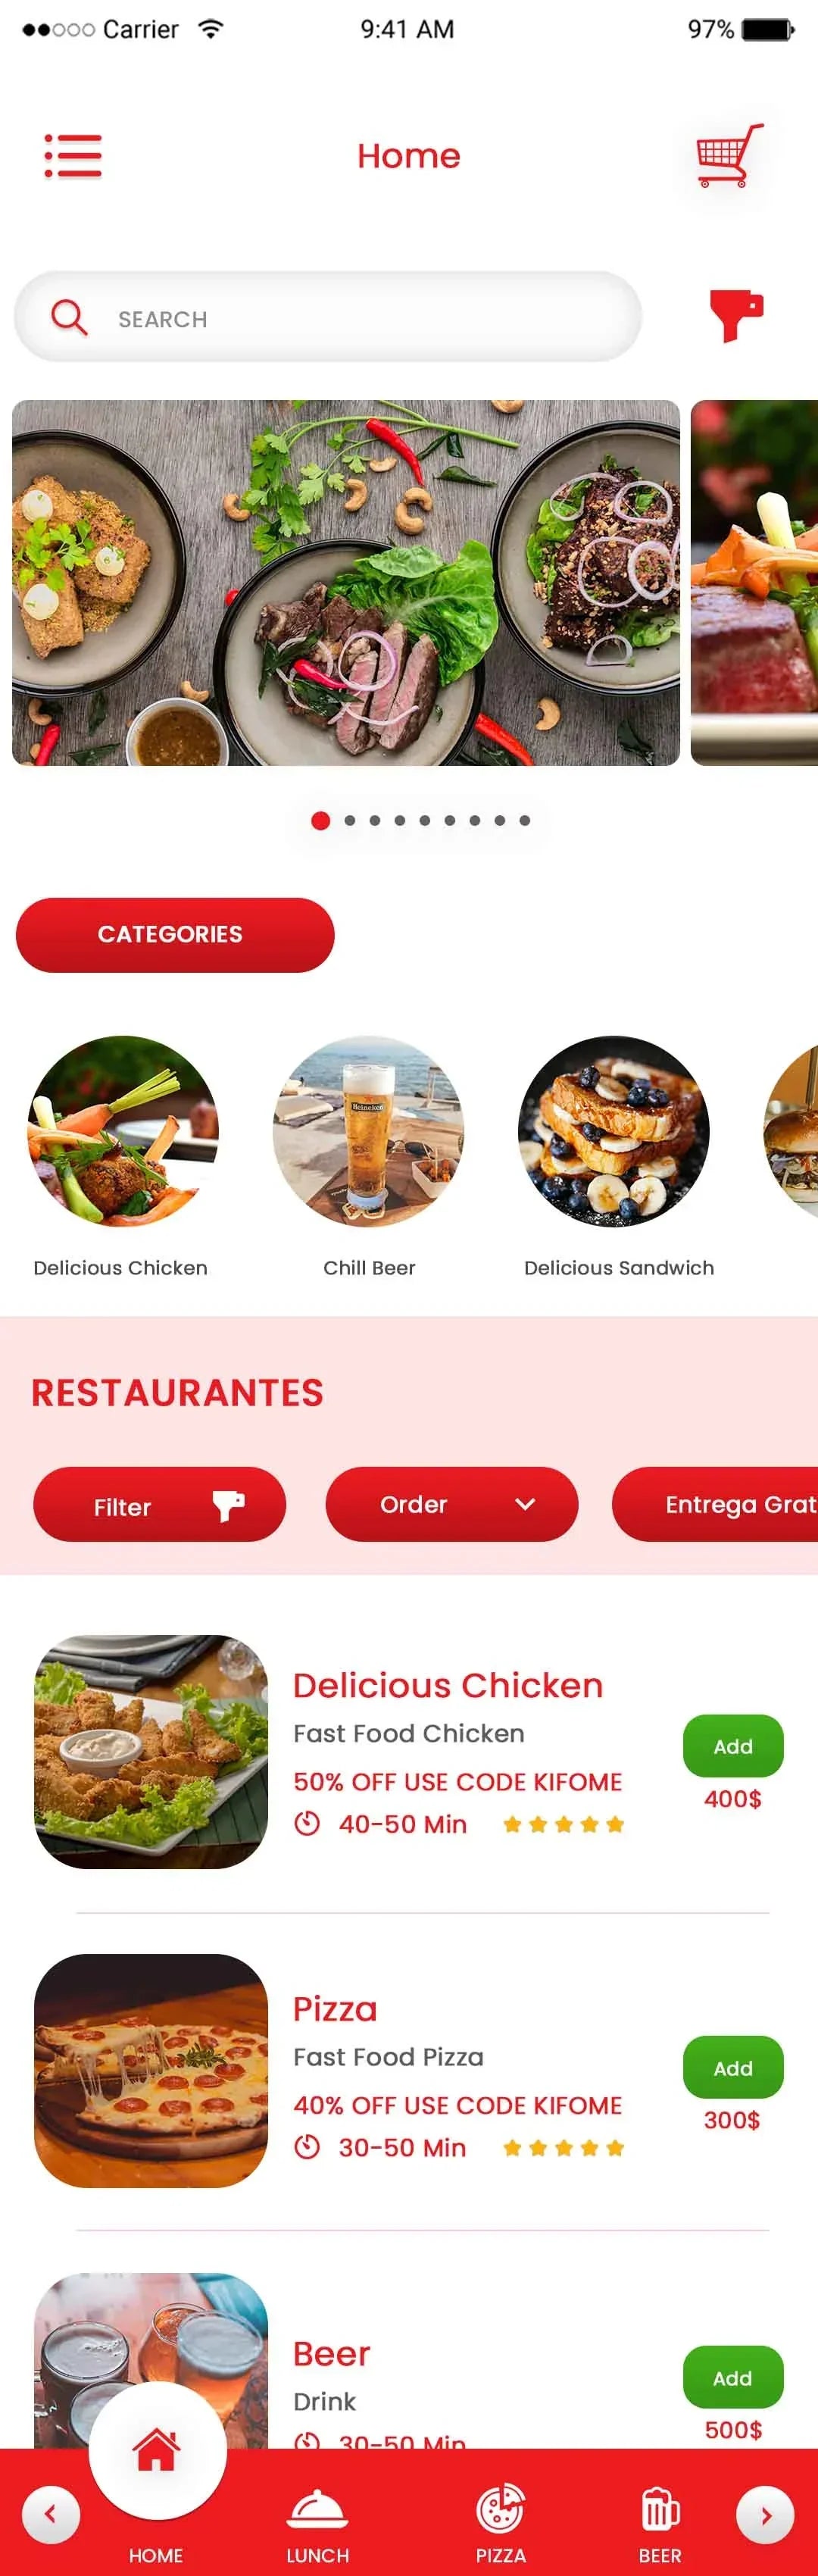 Home Screen, We update the eater with order status and other details.